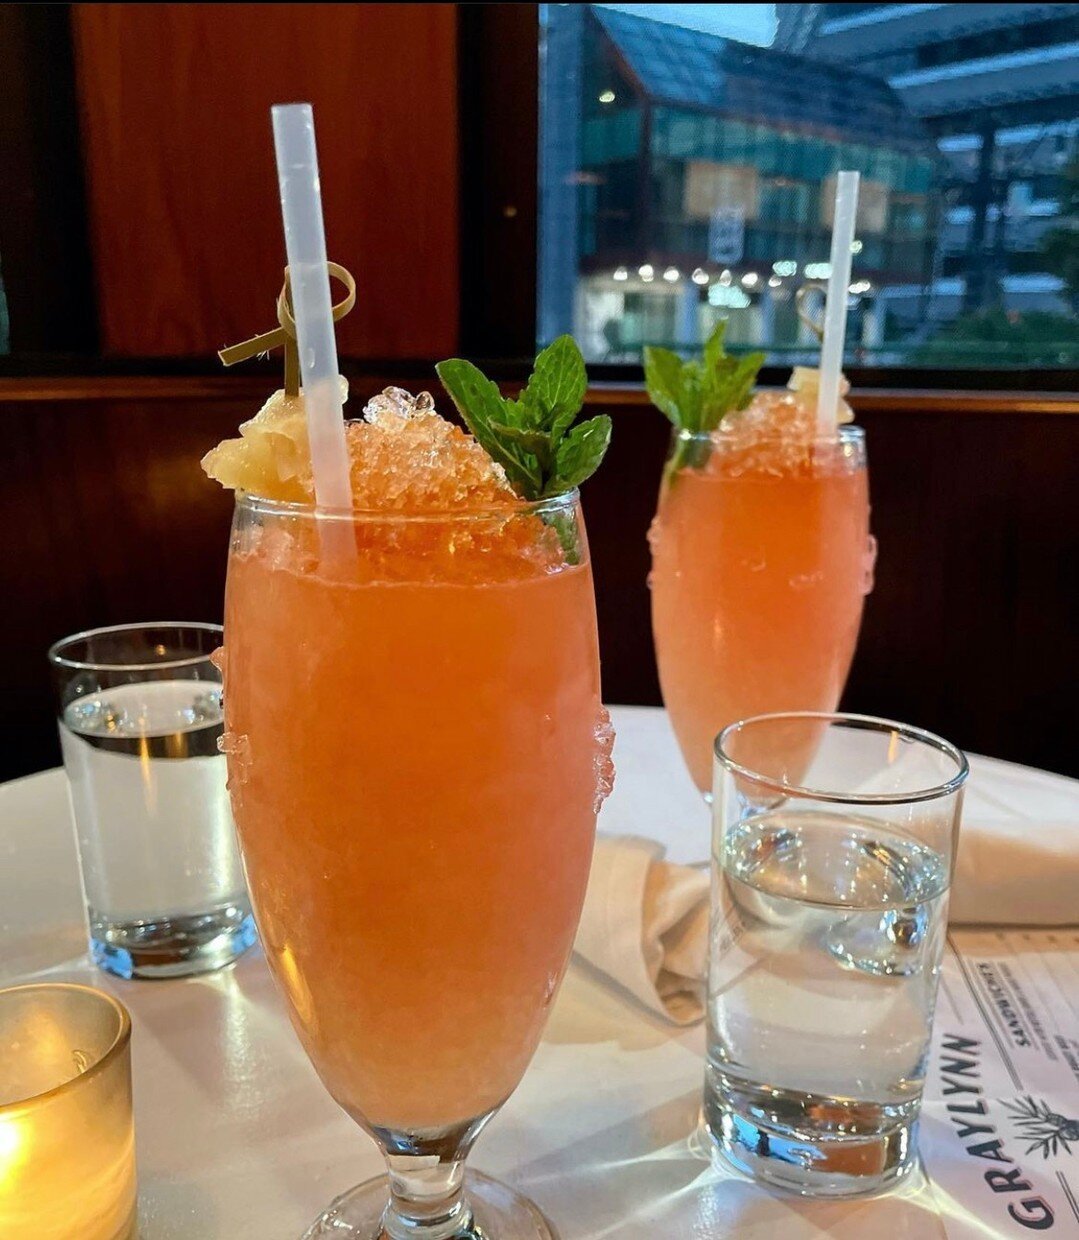 Refresh yourself &amp; get ready for the weekend with our Ringwald cocktail🍹⁣
Gin Lane Pink Gin, ginger watermelon cordial, lemon, &amp; angostura bitters  #gincocktails #ginbar #summercocktails ⁣
.⁣
.⁣
.⁣
📷: @kimmarieck